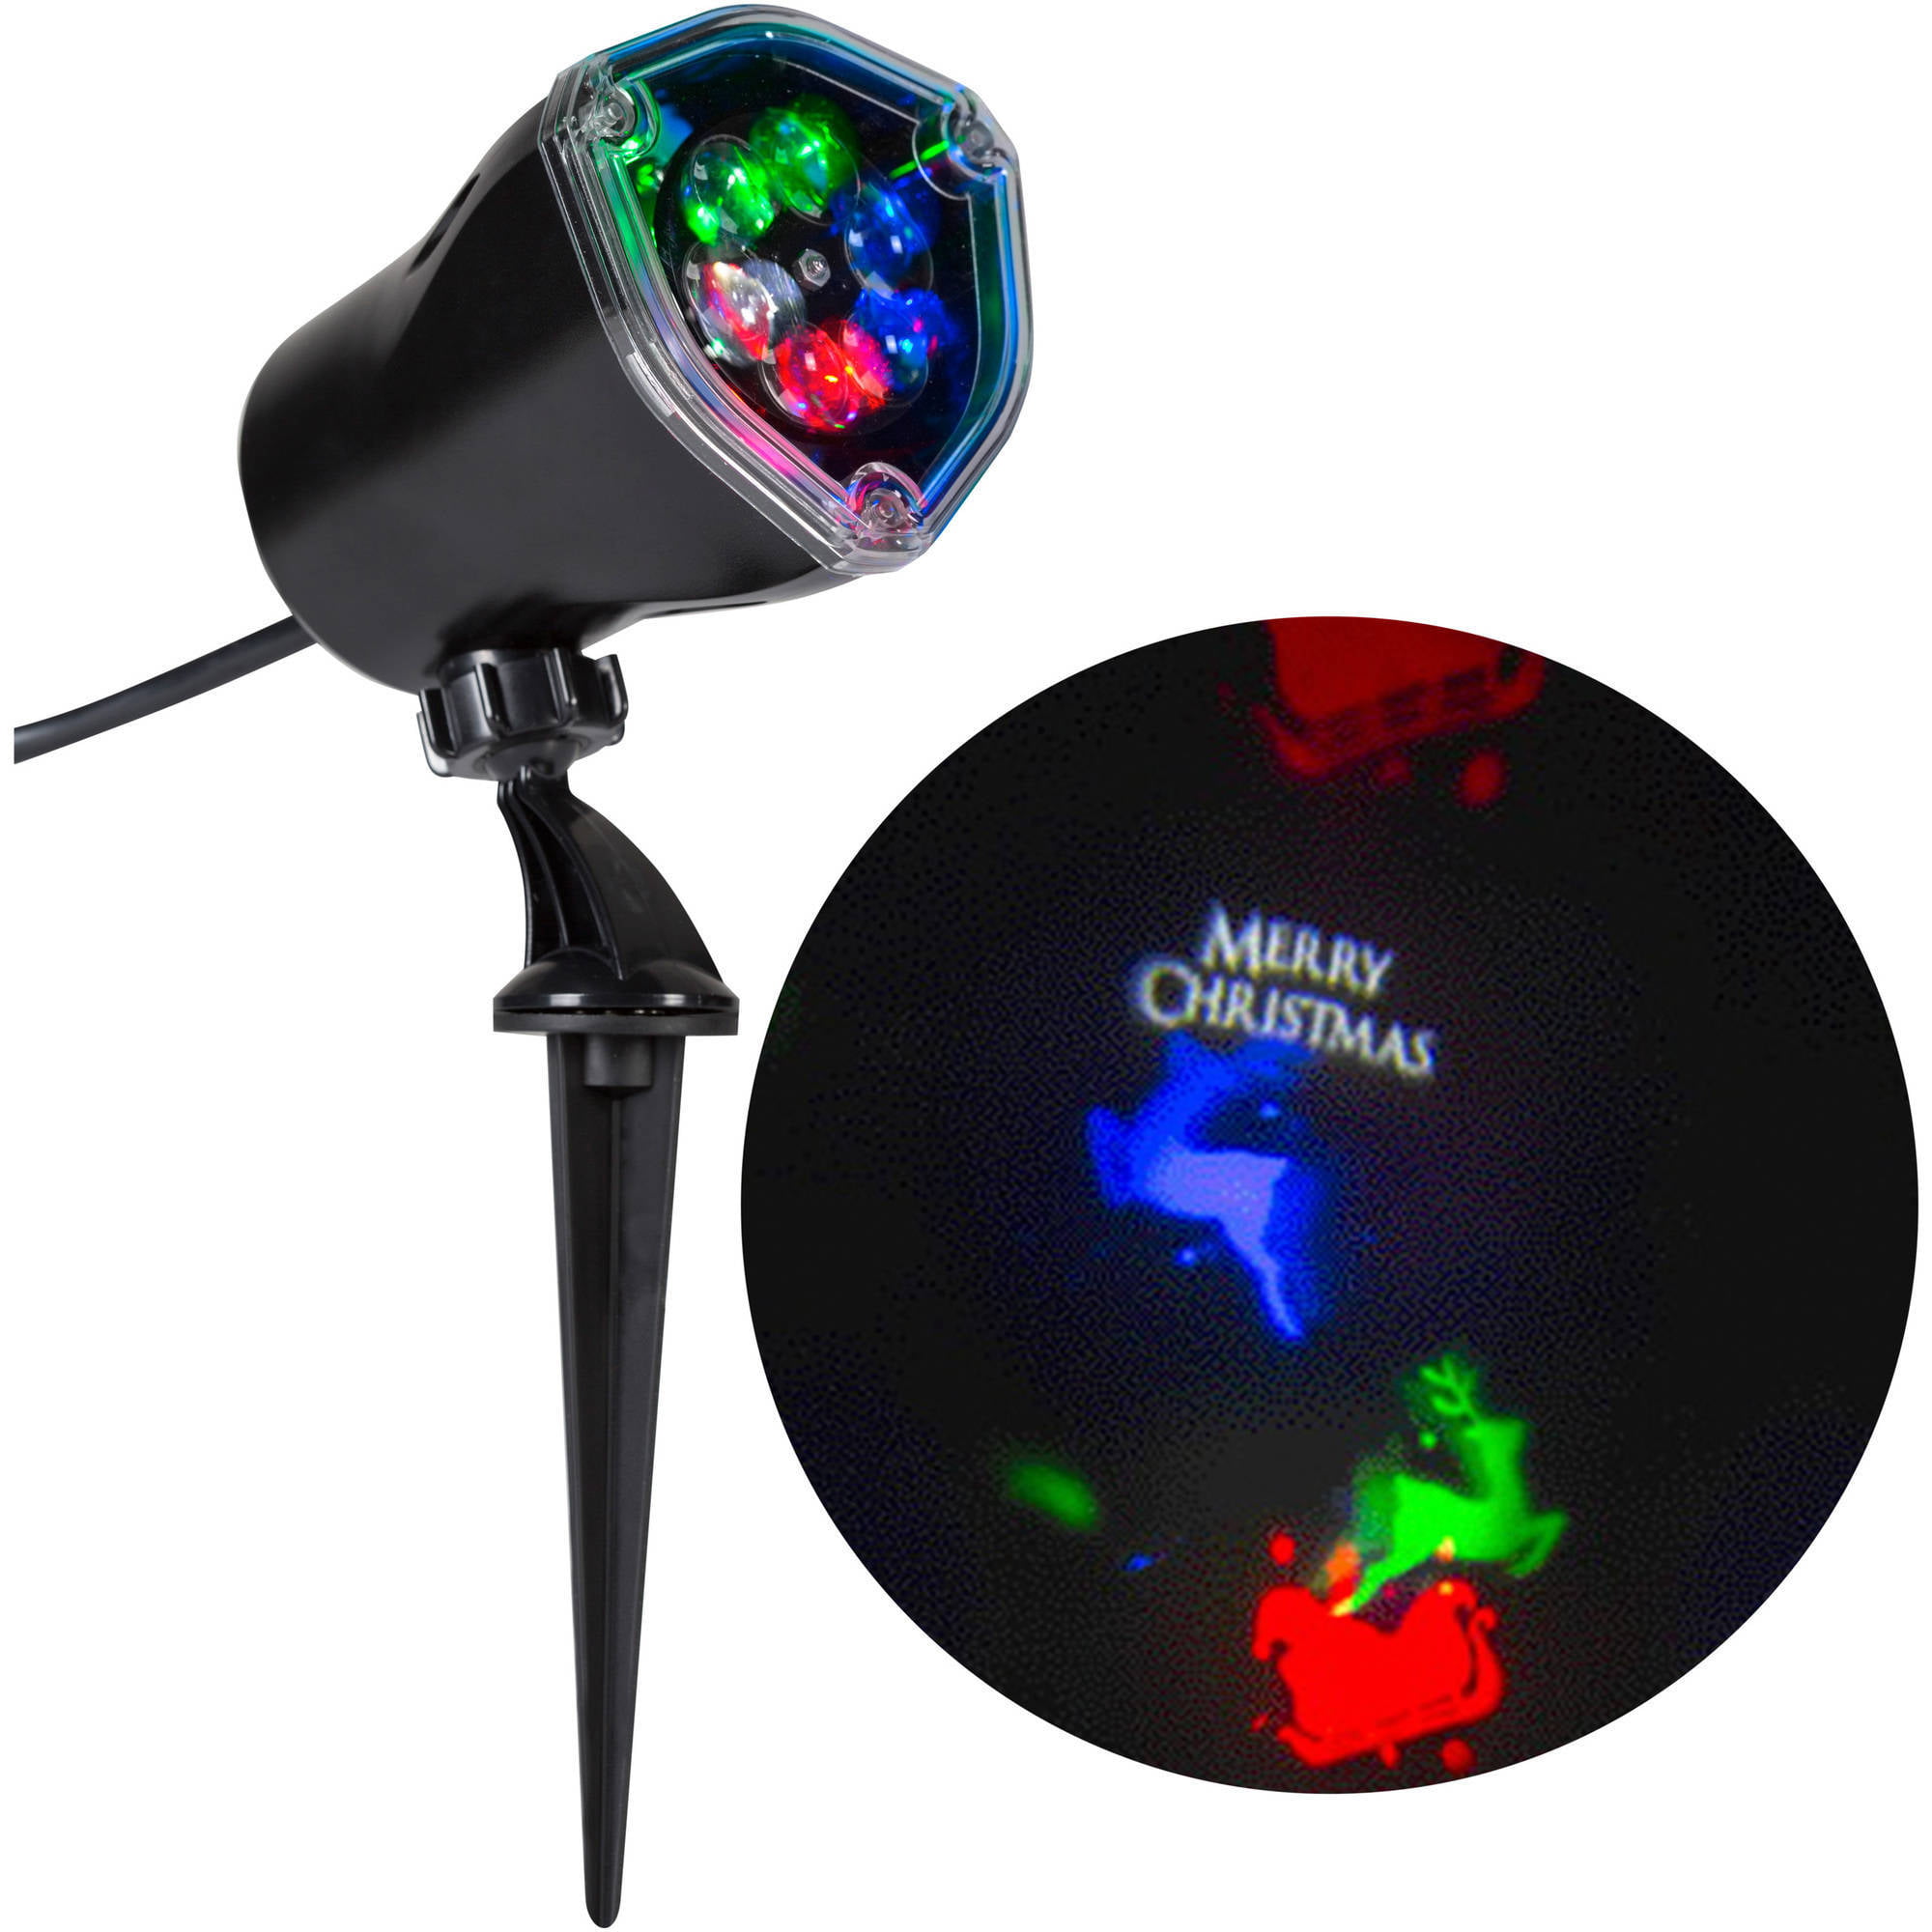 GEMMY PROJECTOR PROJECTION LED WHIRL A MOTION RED WHITE GREEN  LIGHT SHOW 